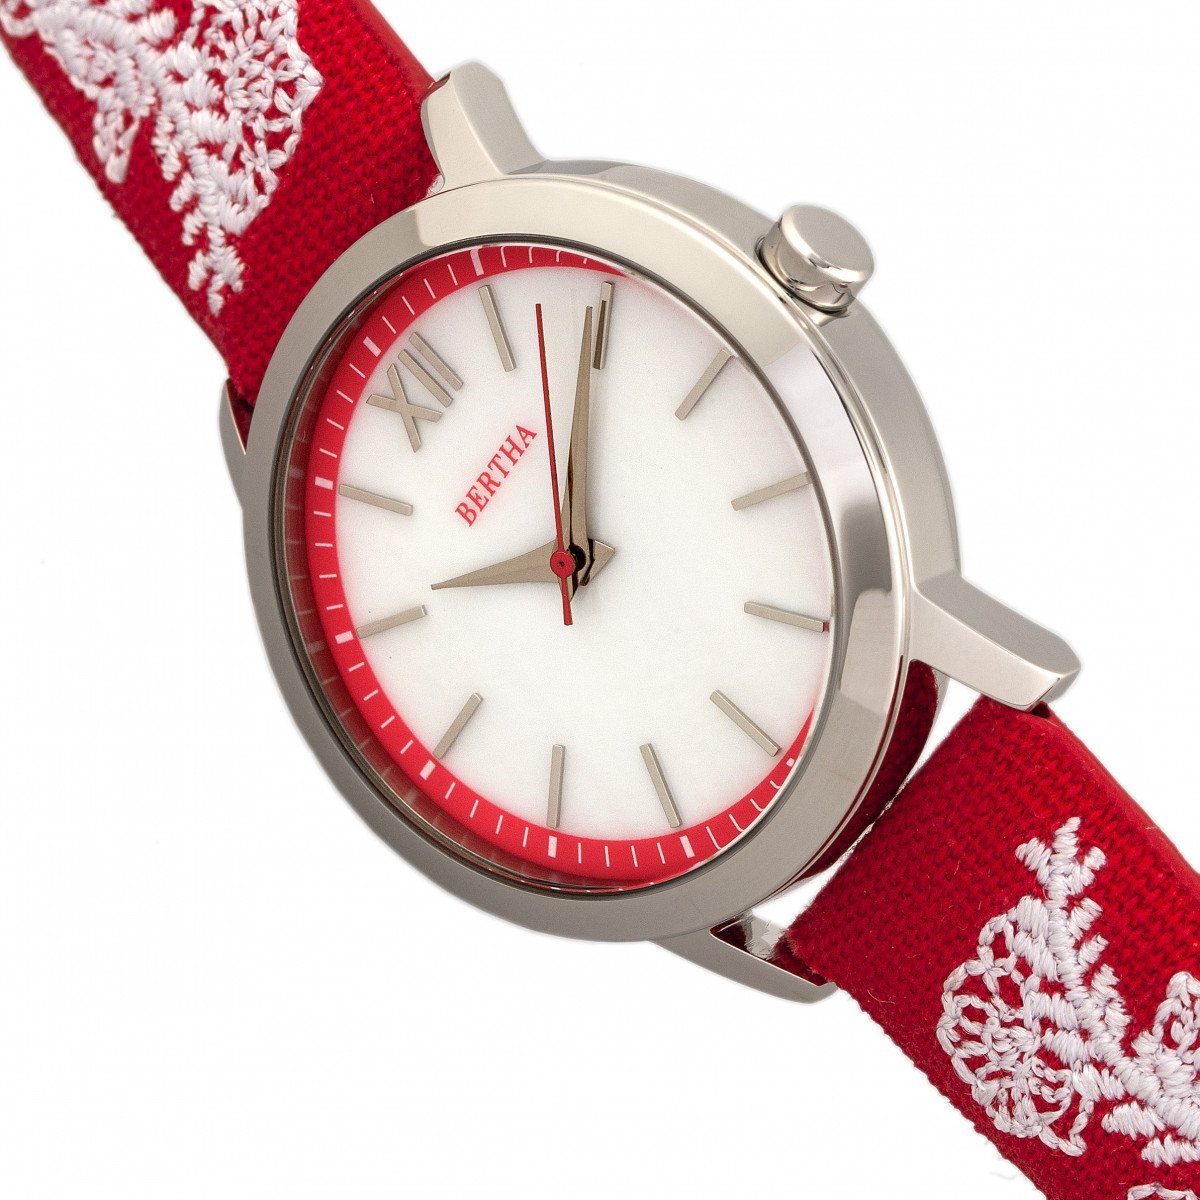 Bertha Penelope MOP Leather-Band Watch - Red  - BTHBR7301